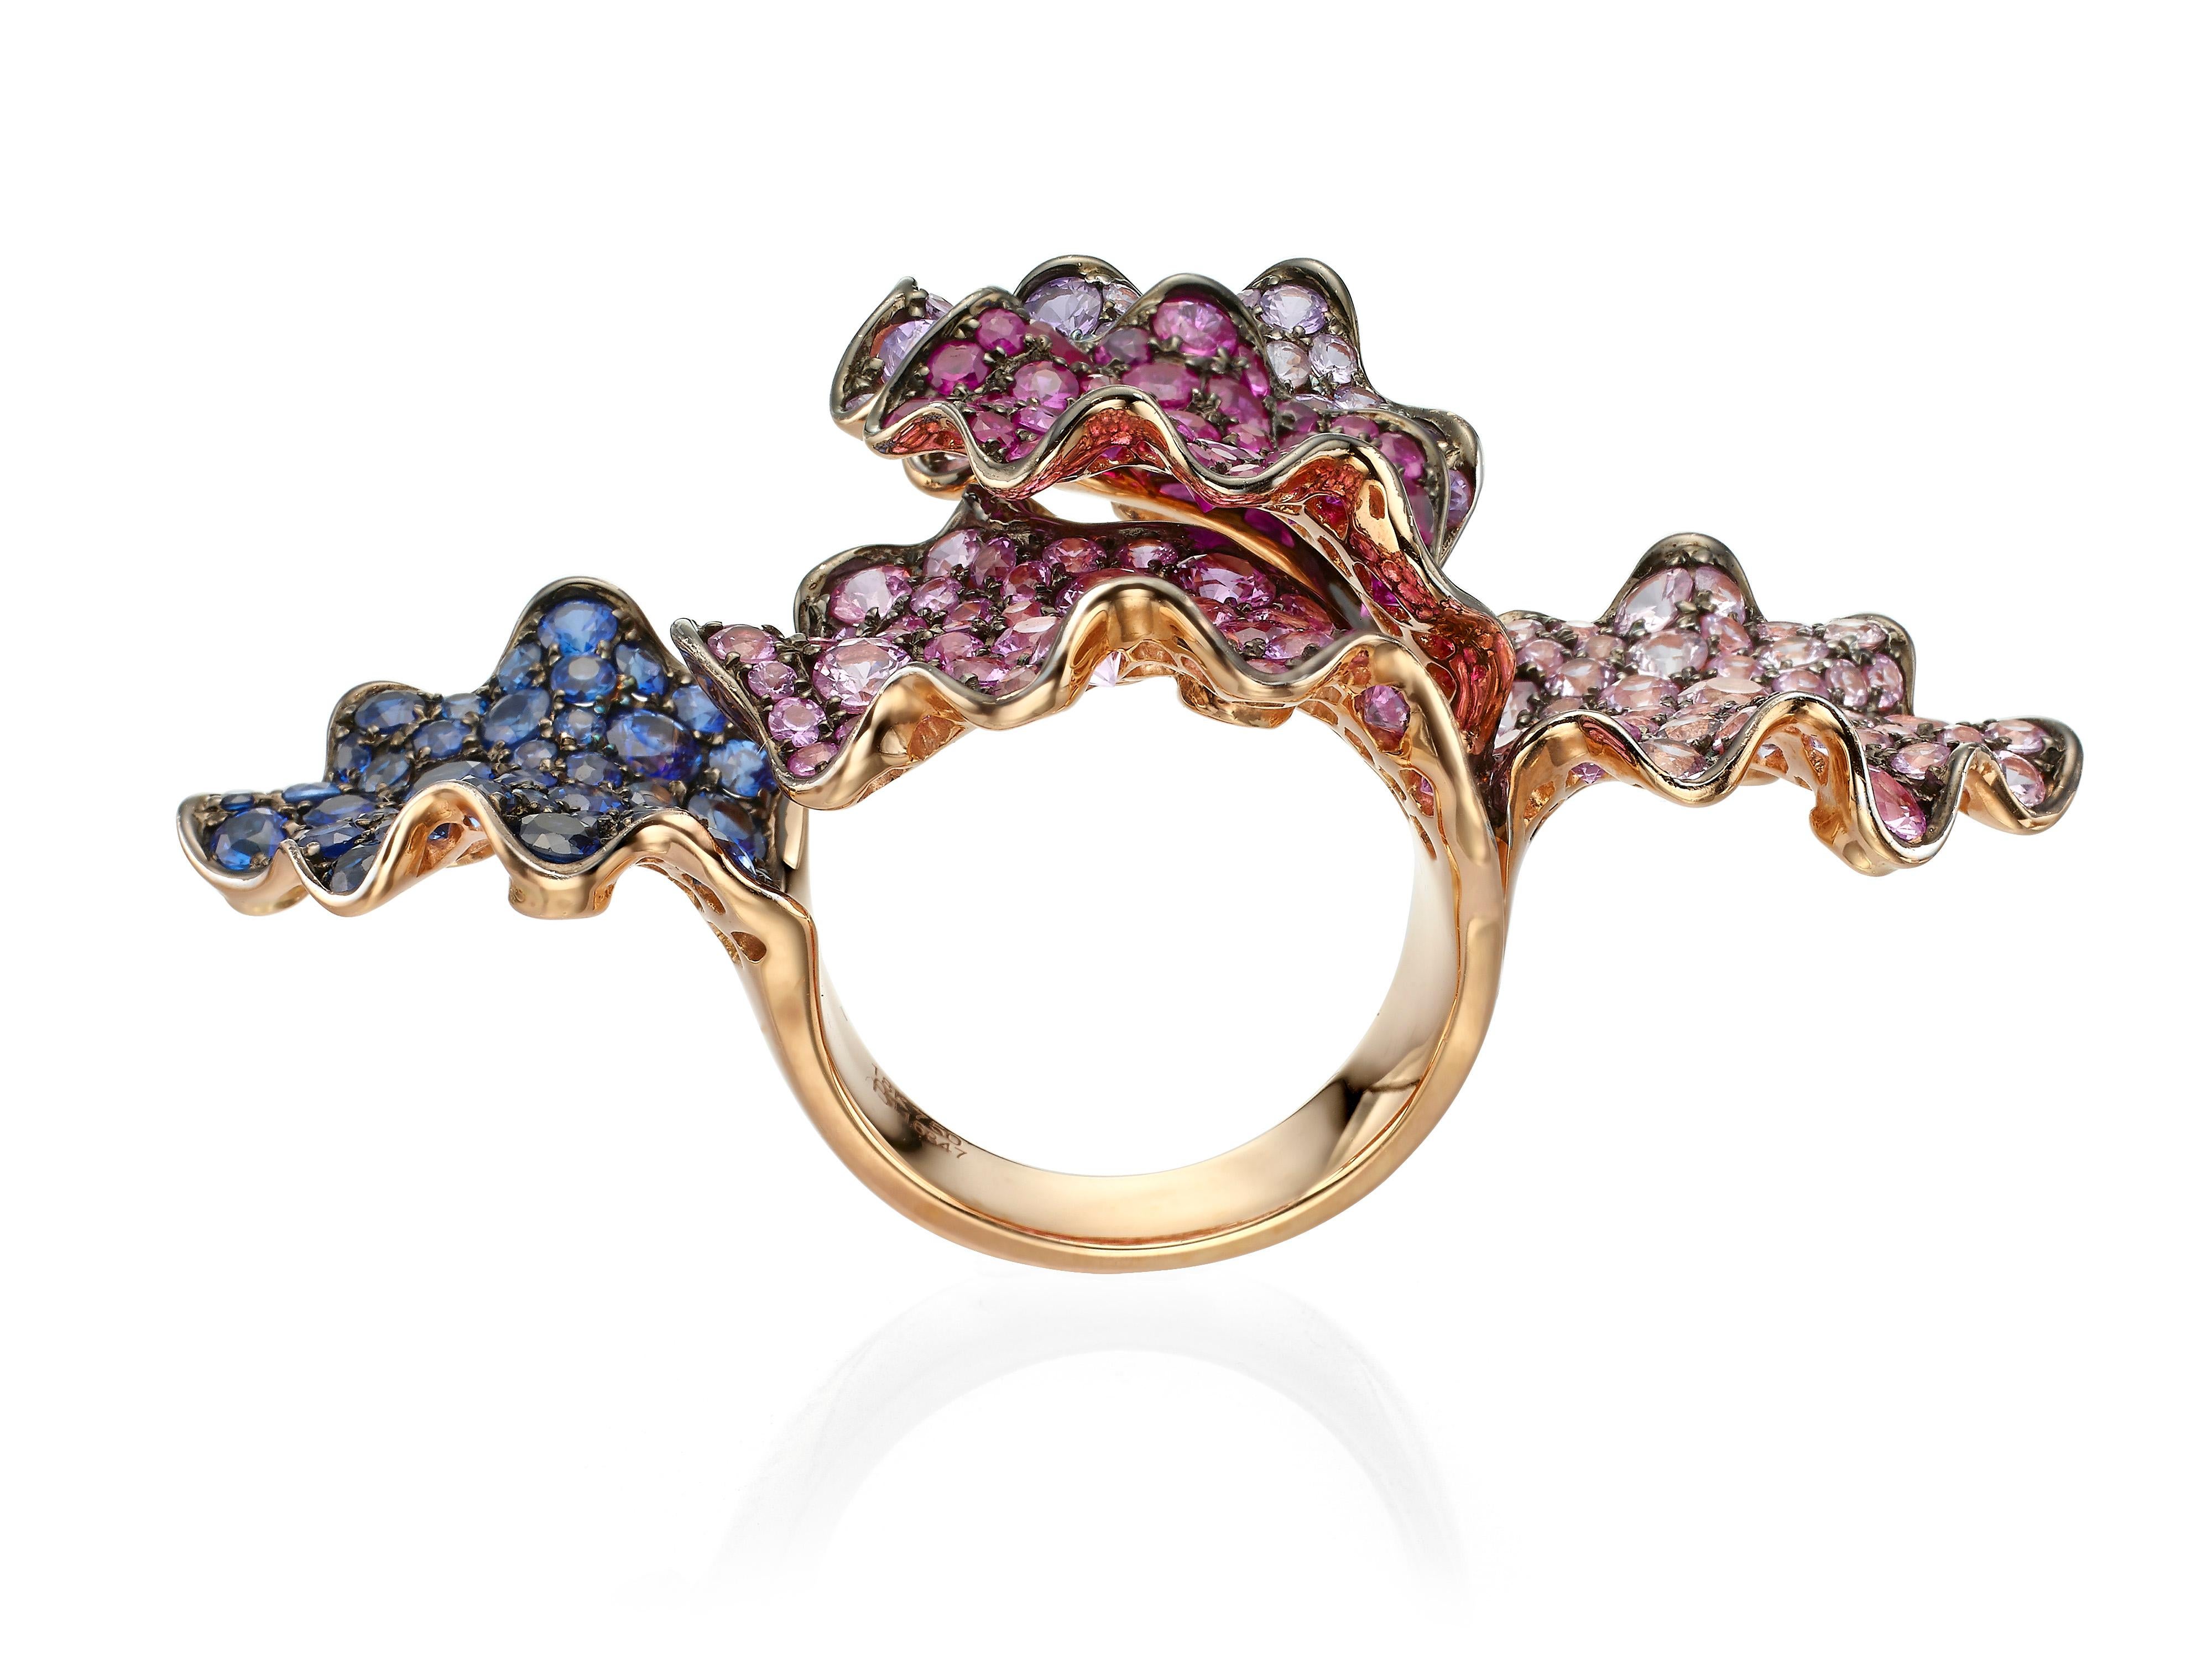 This enchanting multi-color sapphire and ruby cocktail ring adds the perfect finishing touch to any ensemble.  Handmade from 18K rose gold with 8.71 carats of pink, blue and purple sapphires and 2.02 carats of rubies.  Currently a ring size US 7. 